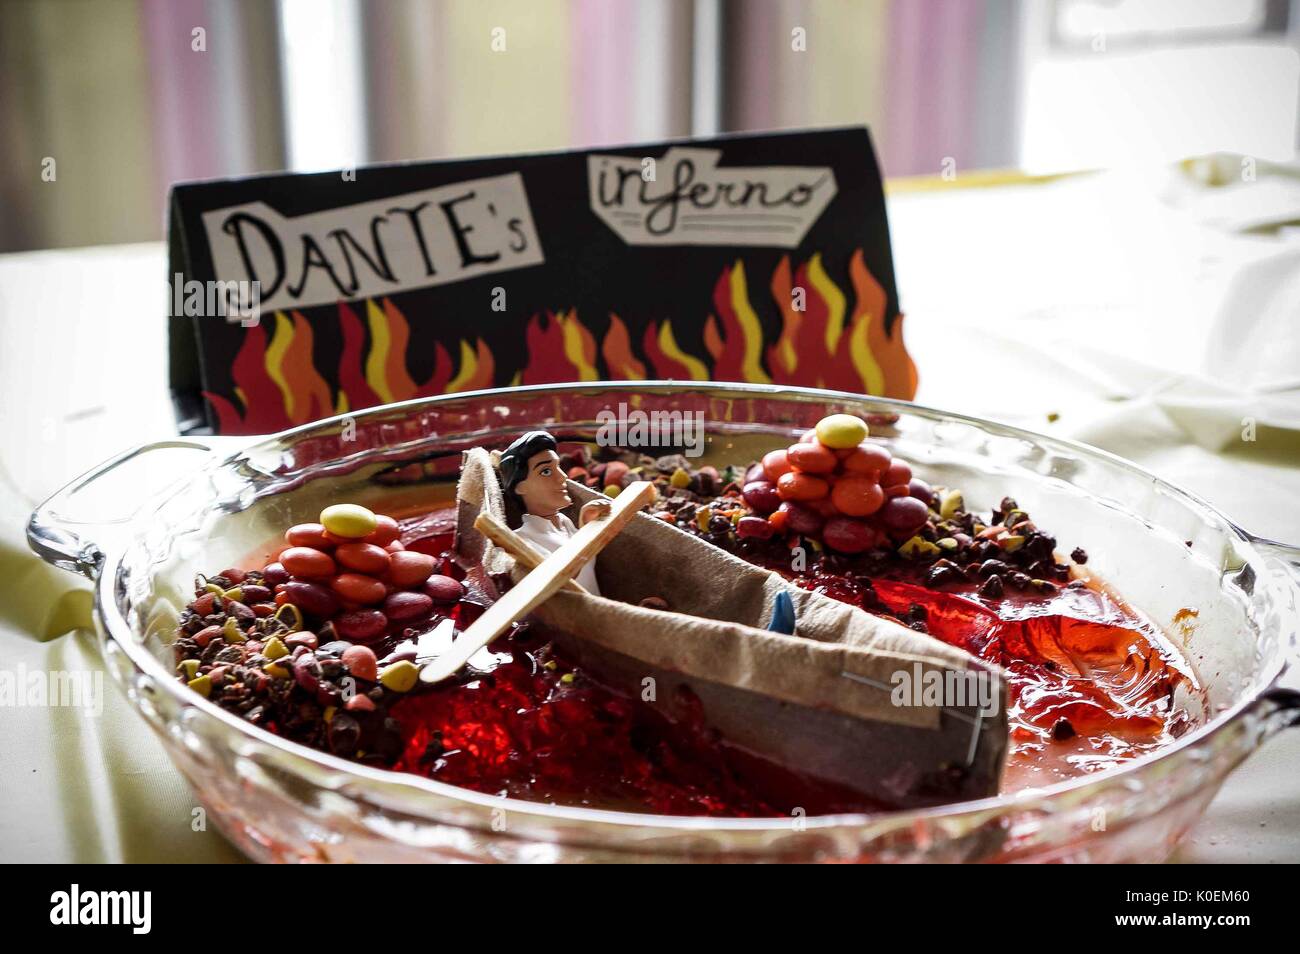 A partially-eaten Dante's Inferno dessert at the 2014 Edible Book Festival, a literary cake competition for students on the Homewood campus of the Johns Hopkins University in Baltimore, Maryland, 2014. Courtesy Eric Chen. Stock Photo